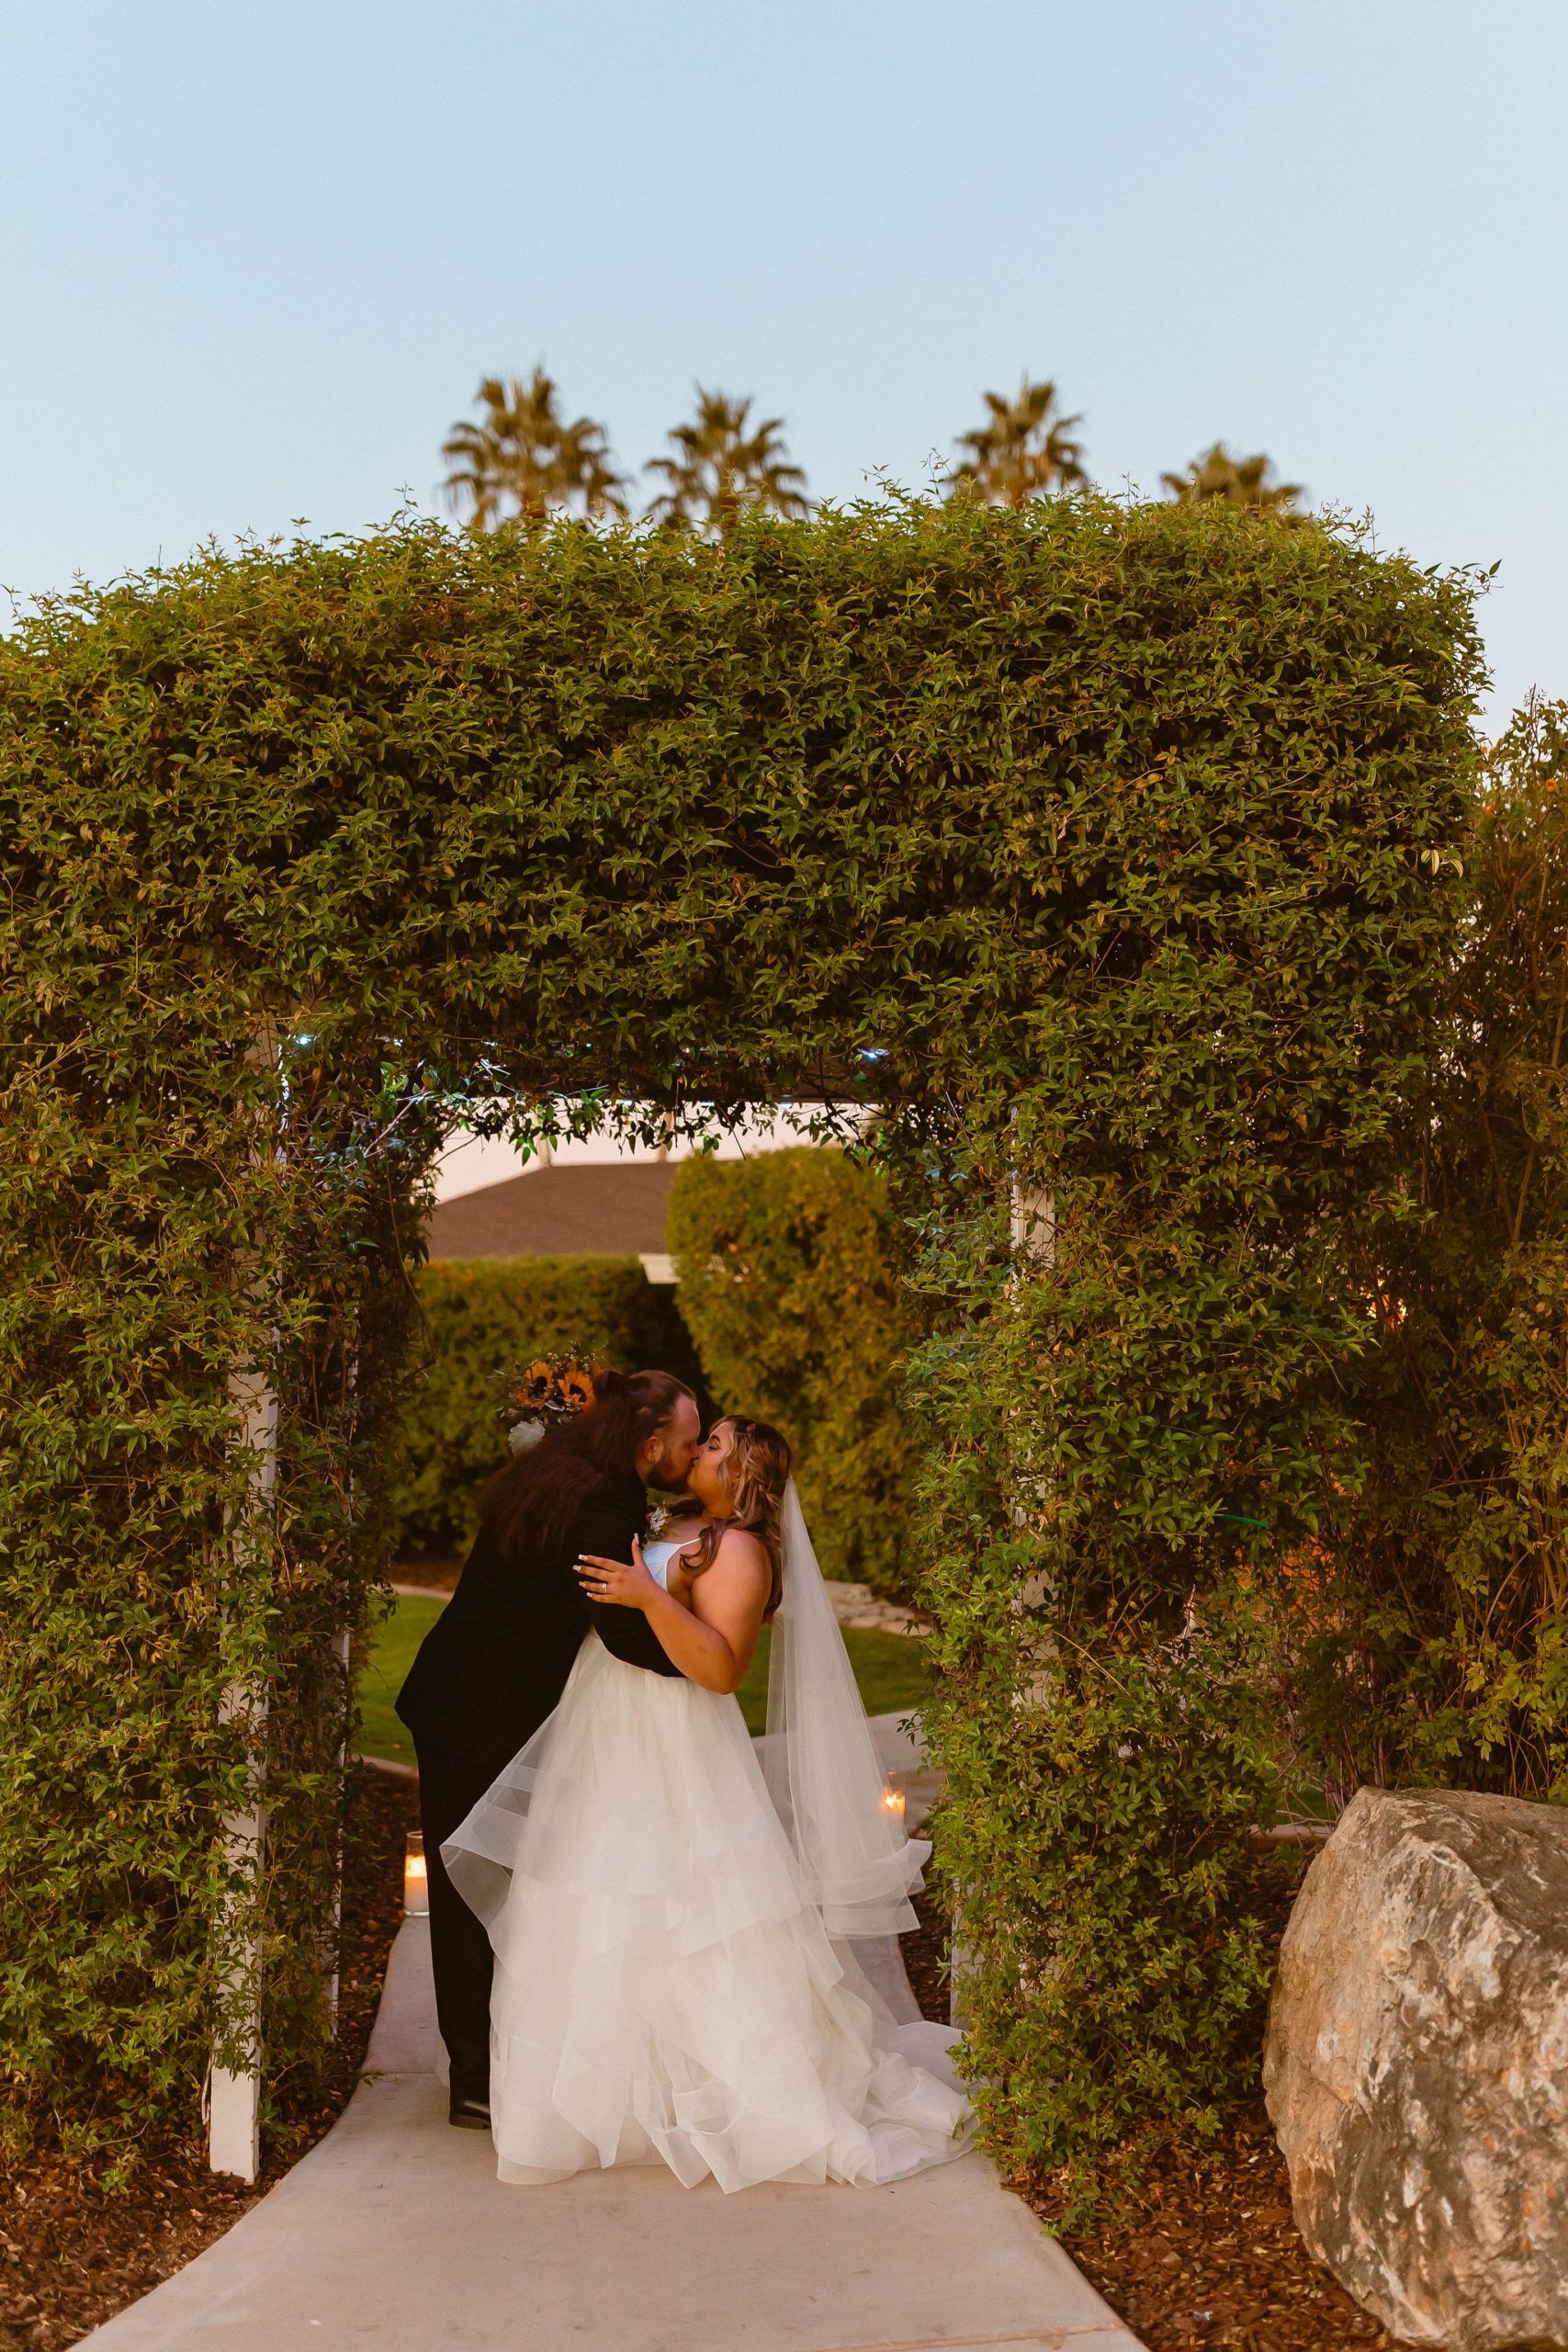 The bride leans in to kiss his bride underneath a arch filled with greenery